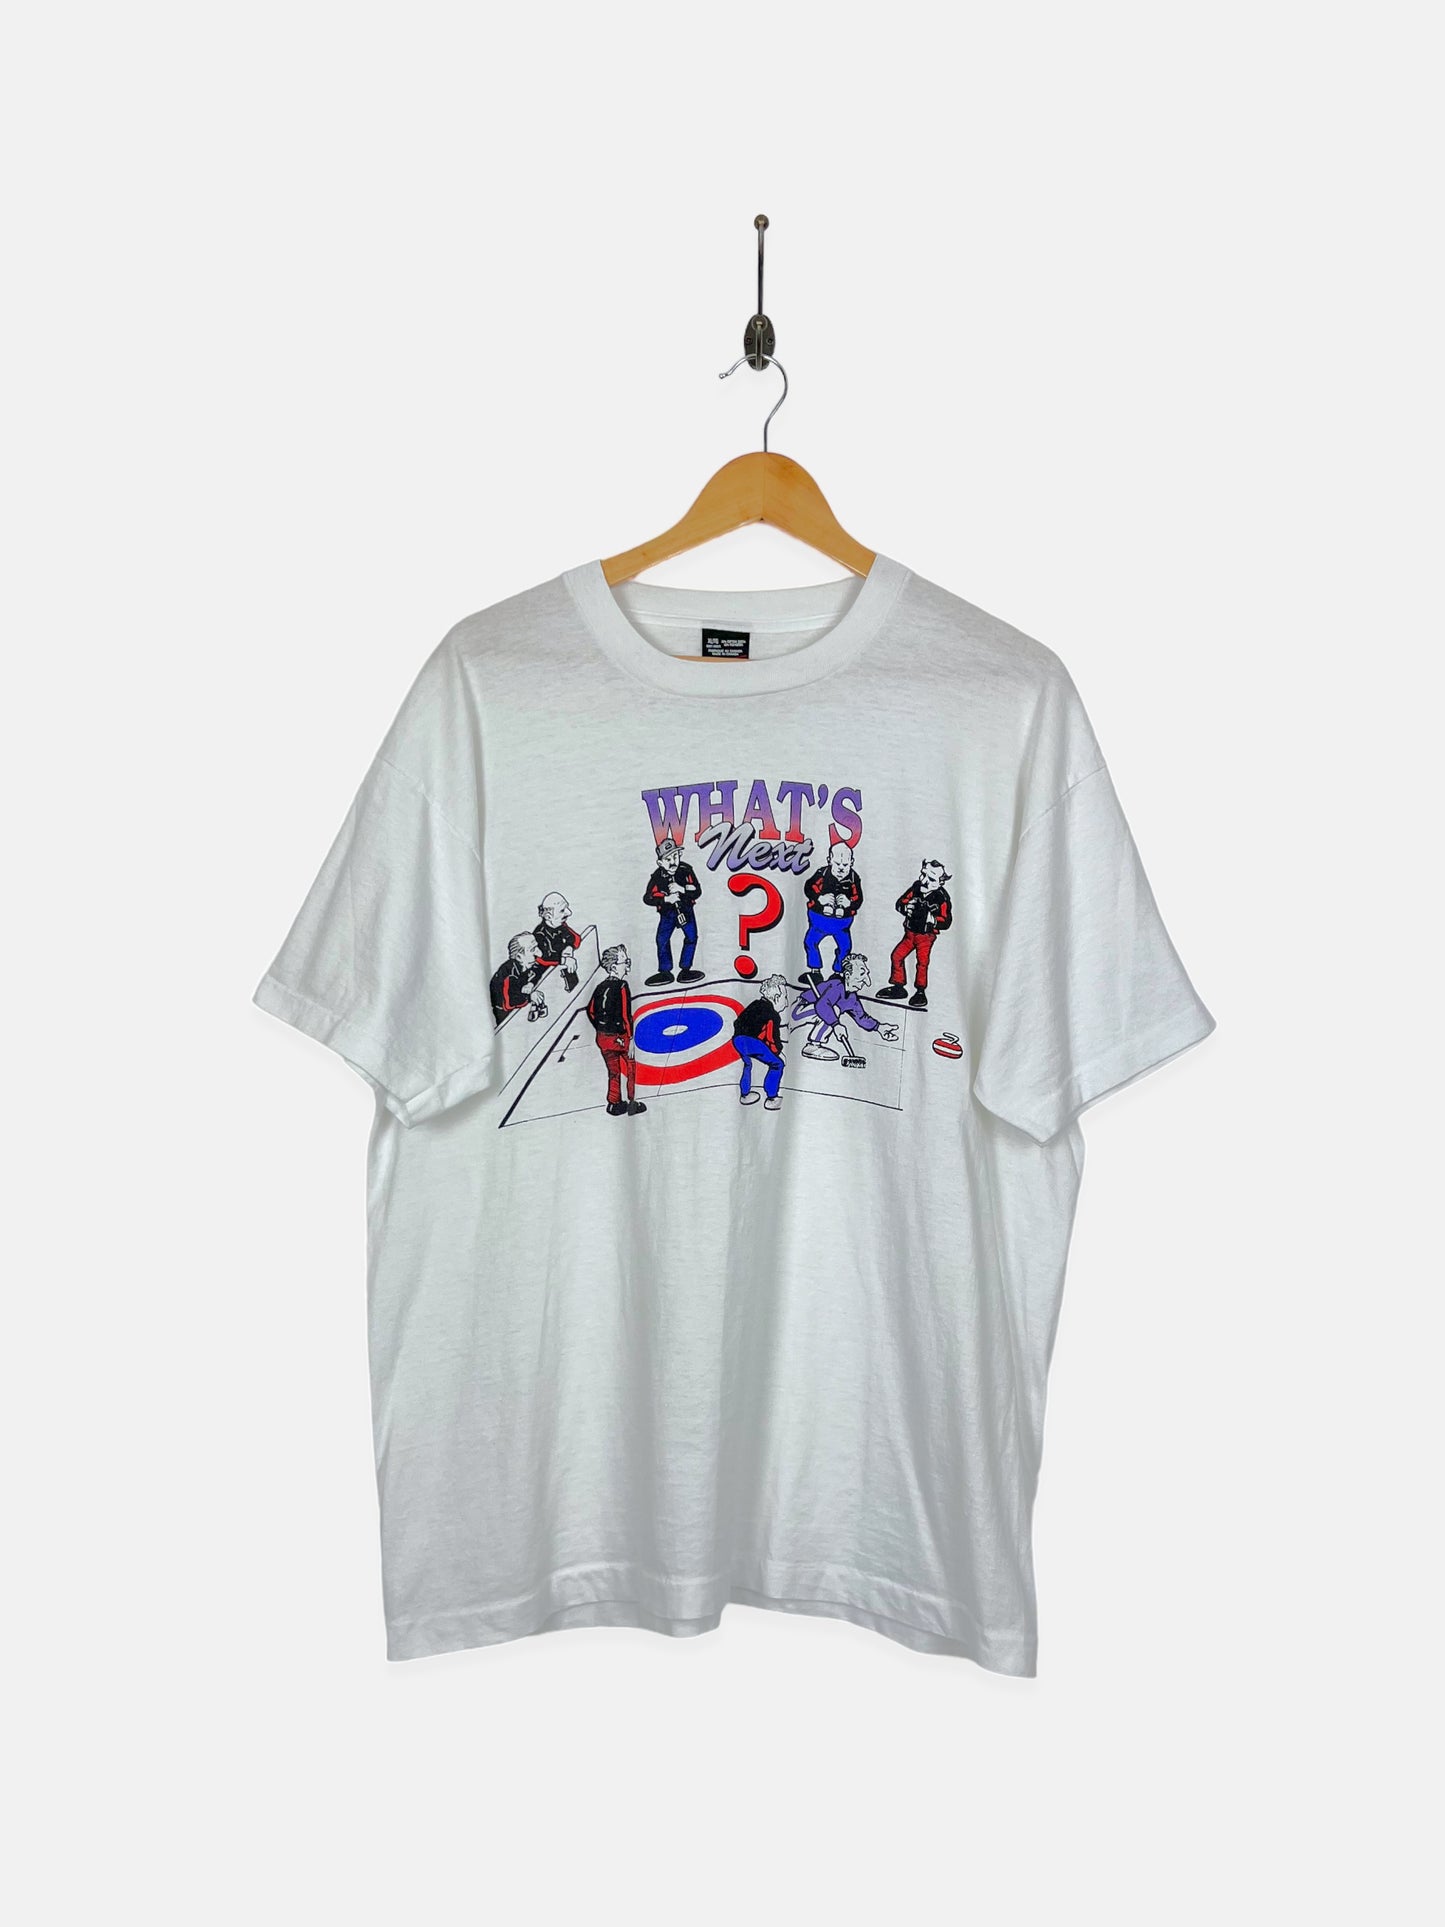 90's What's Next USA Made Vintage T-Shirt Size M